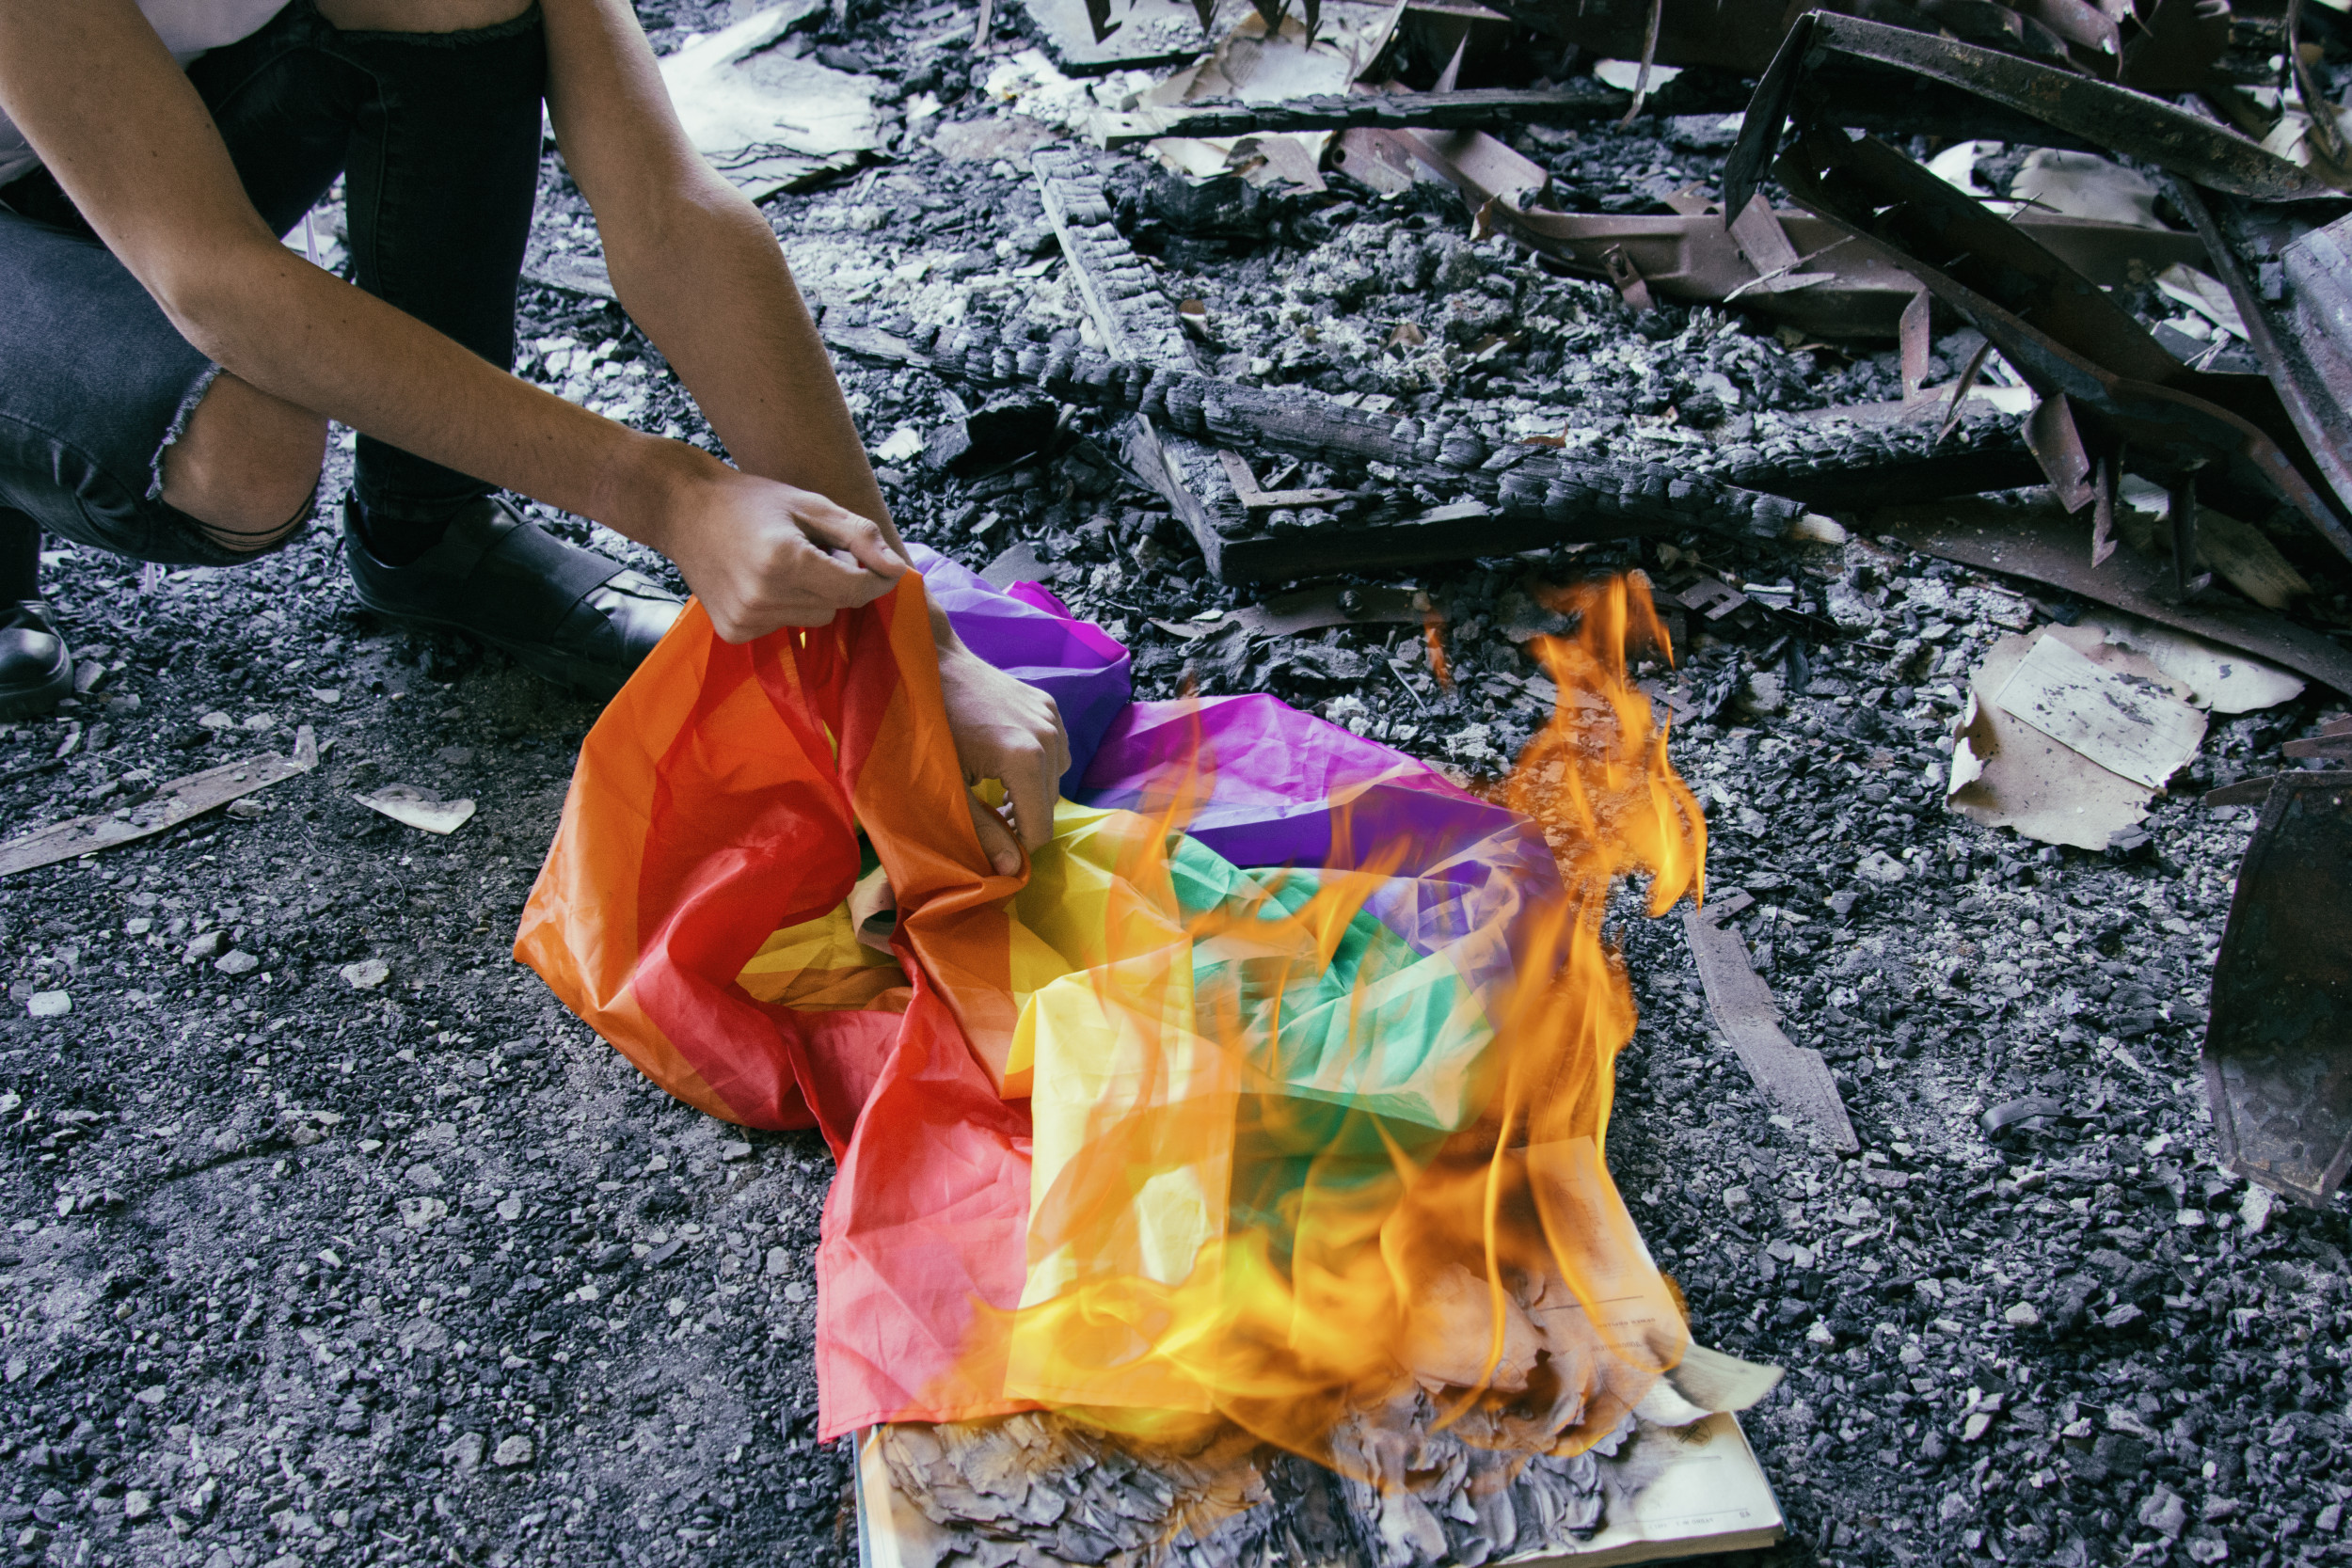 Couples Pride Flag Set On Fire In Possible Hate Crime Caught On Camera